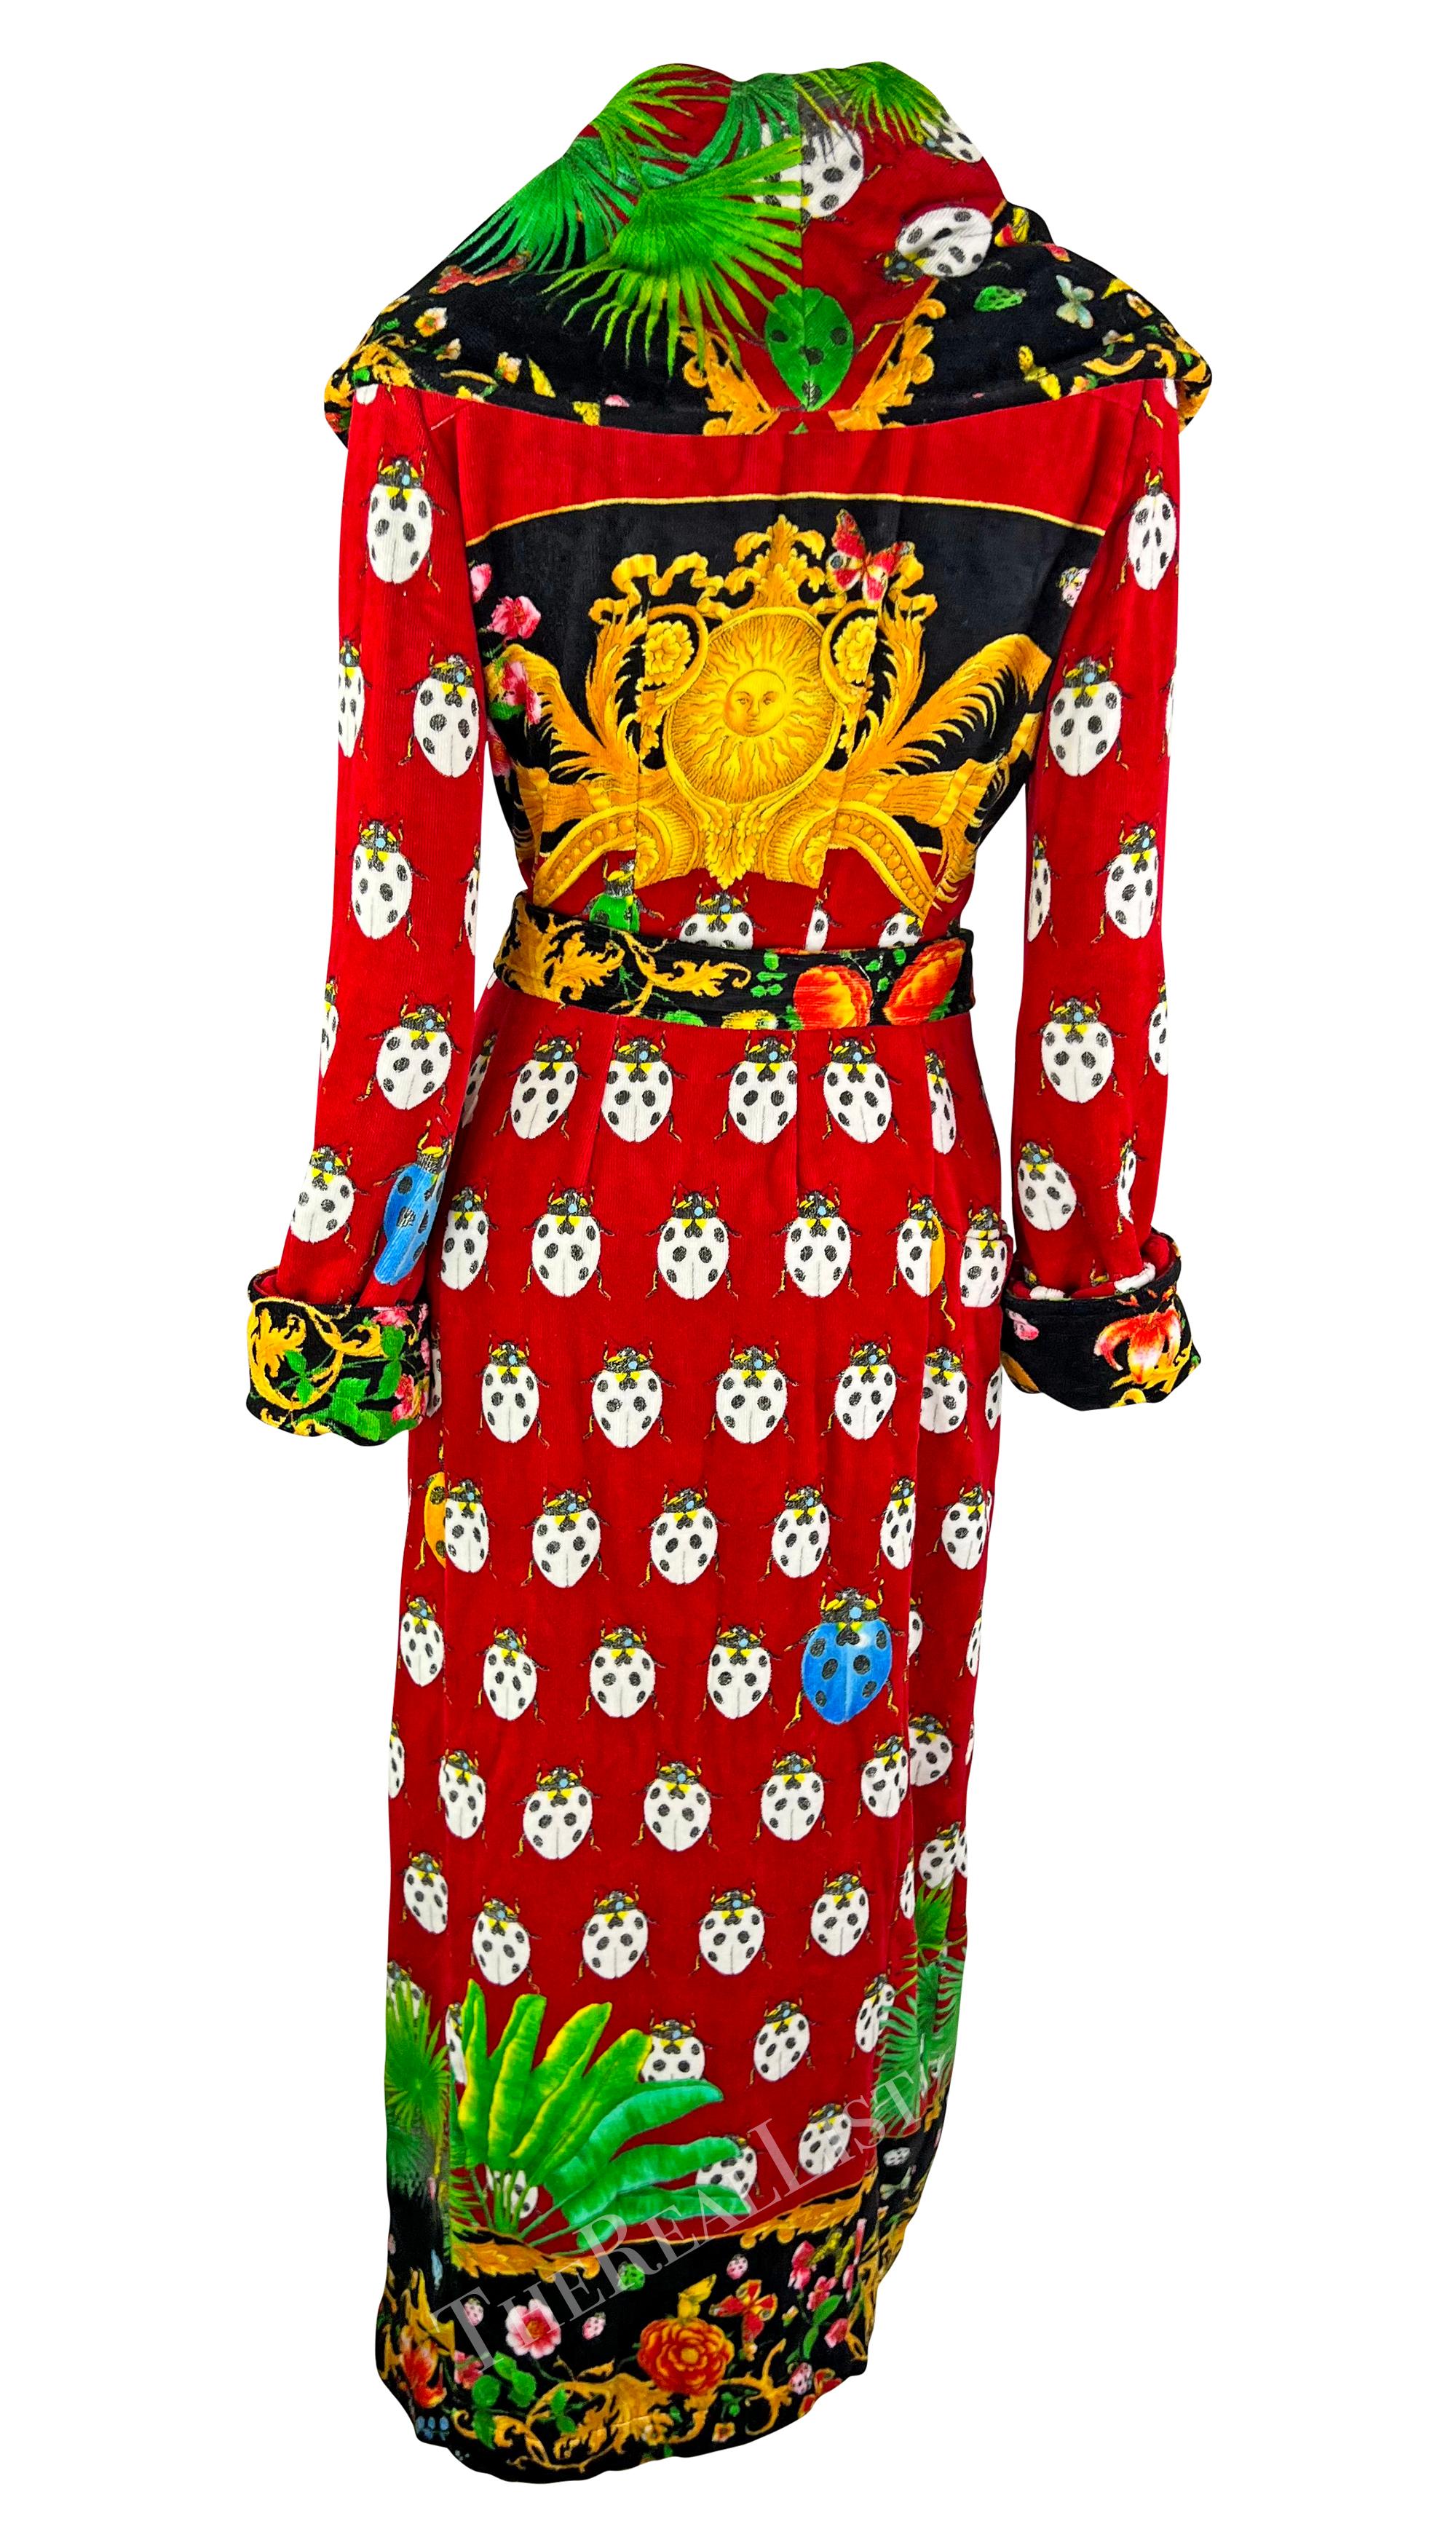 S/S 1995 Gianni Versace Red Lady Bug Print Corset Boned Terrycloth Robe For Sale 4